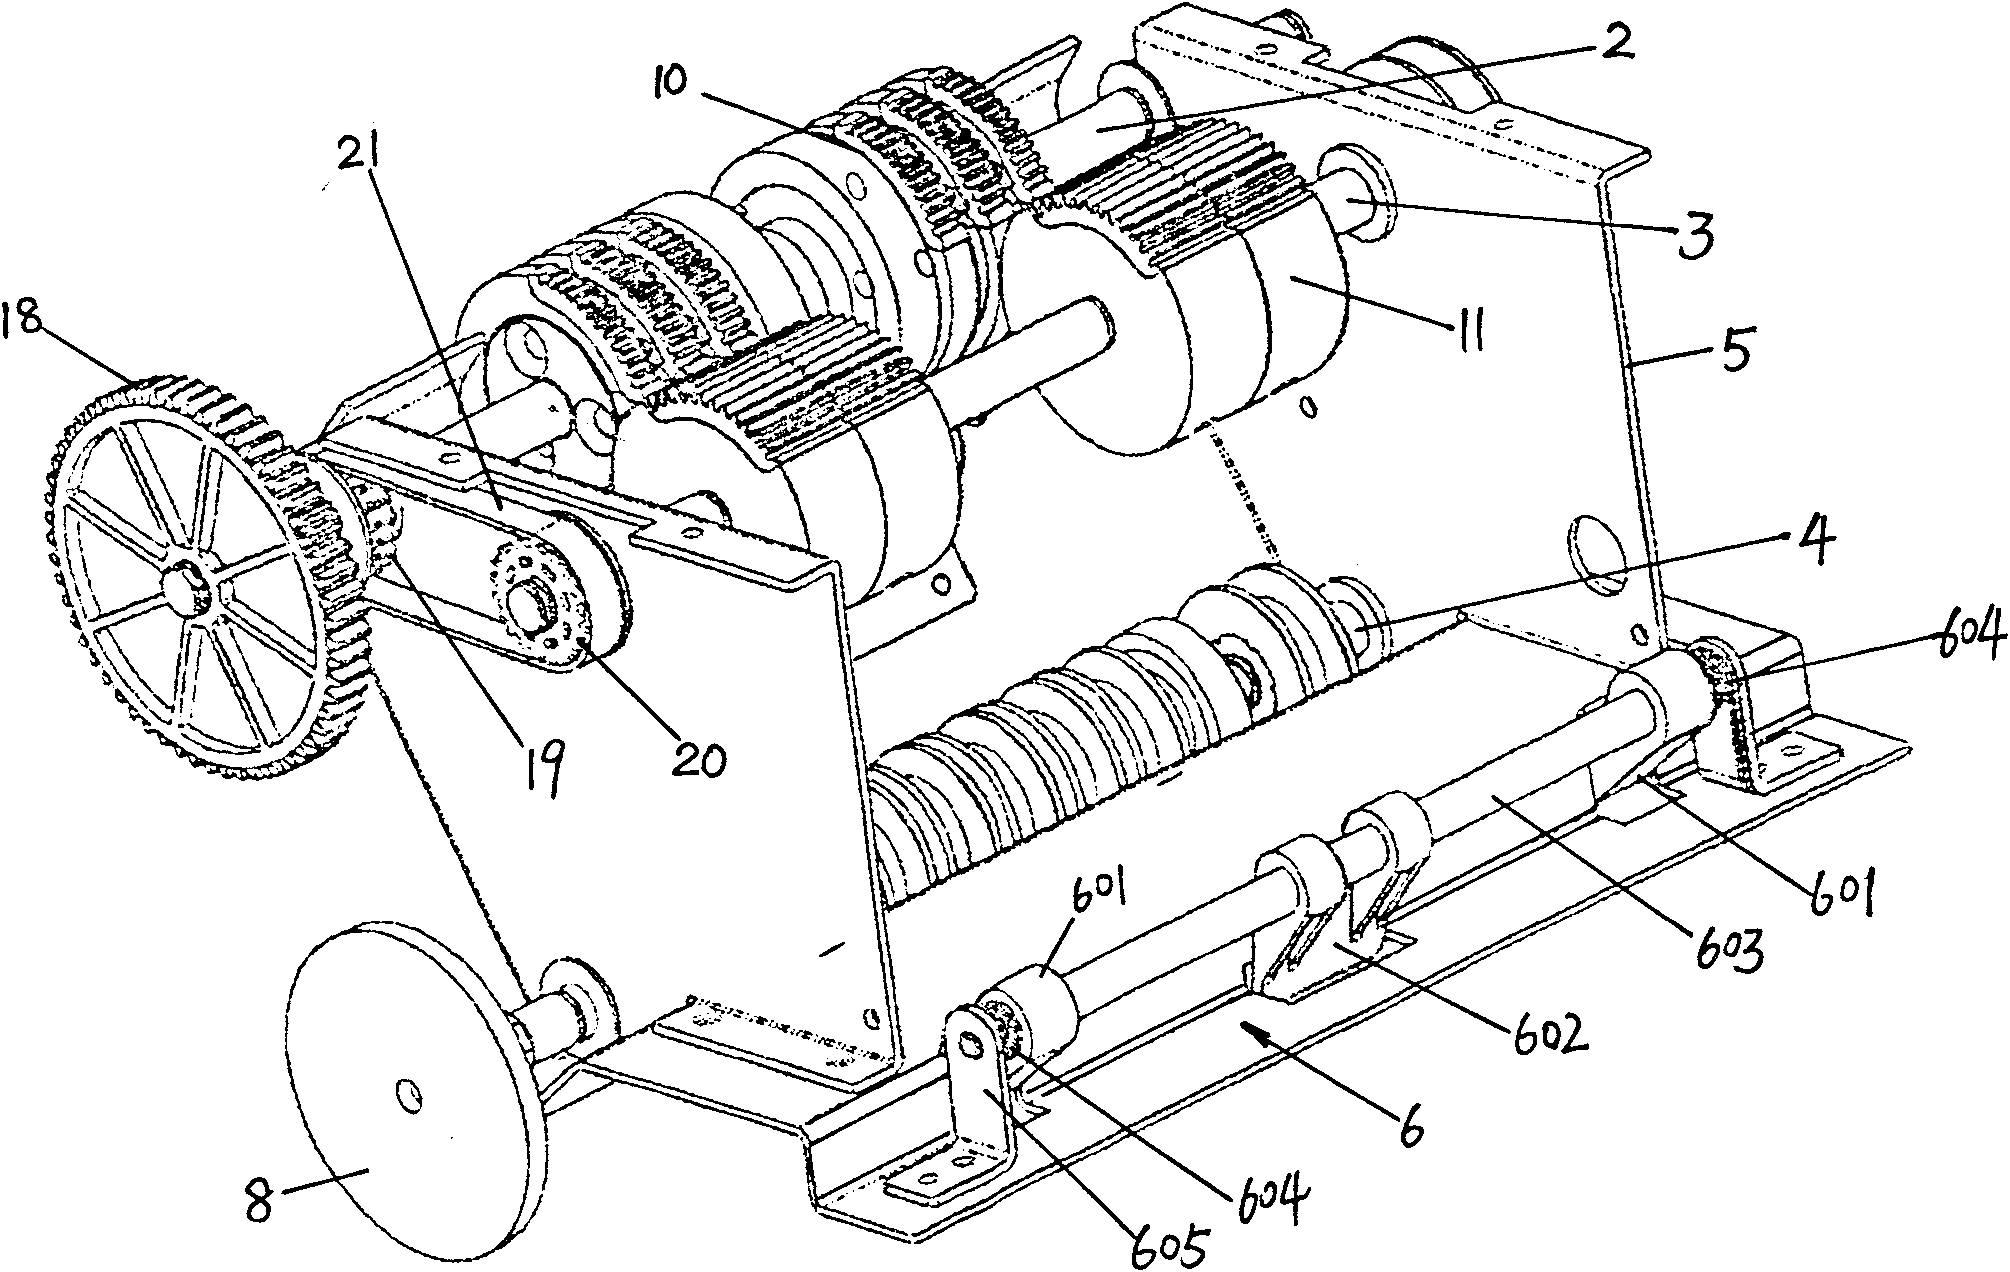 Vertical currency counting machine with note transfer passage capable of being opened